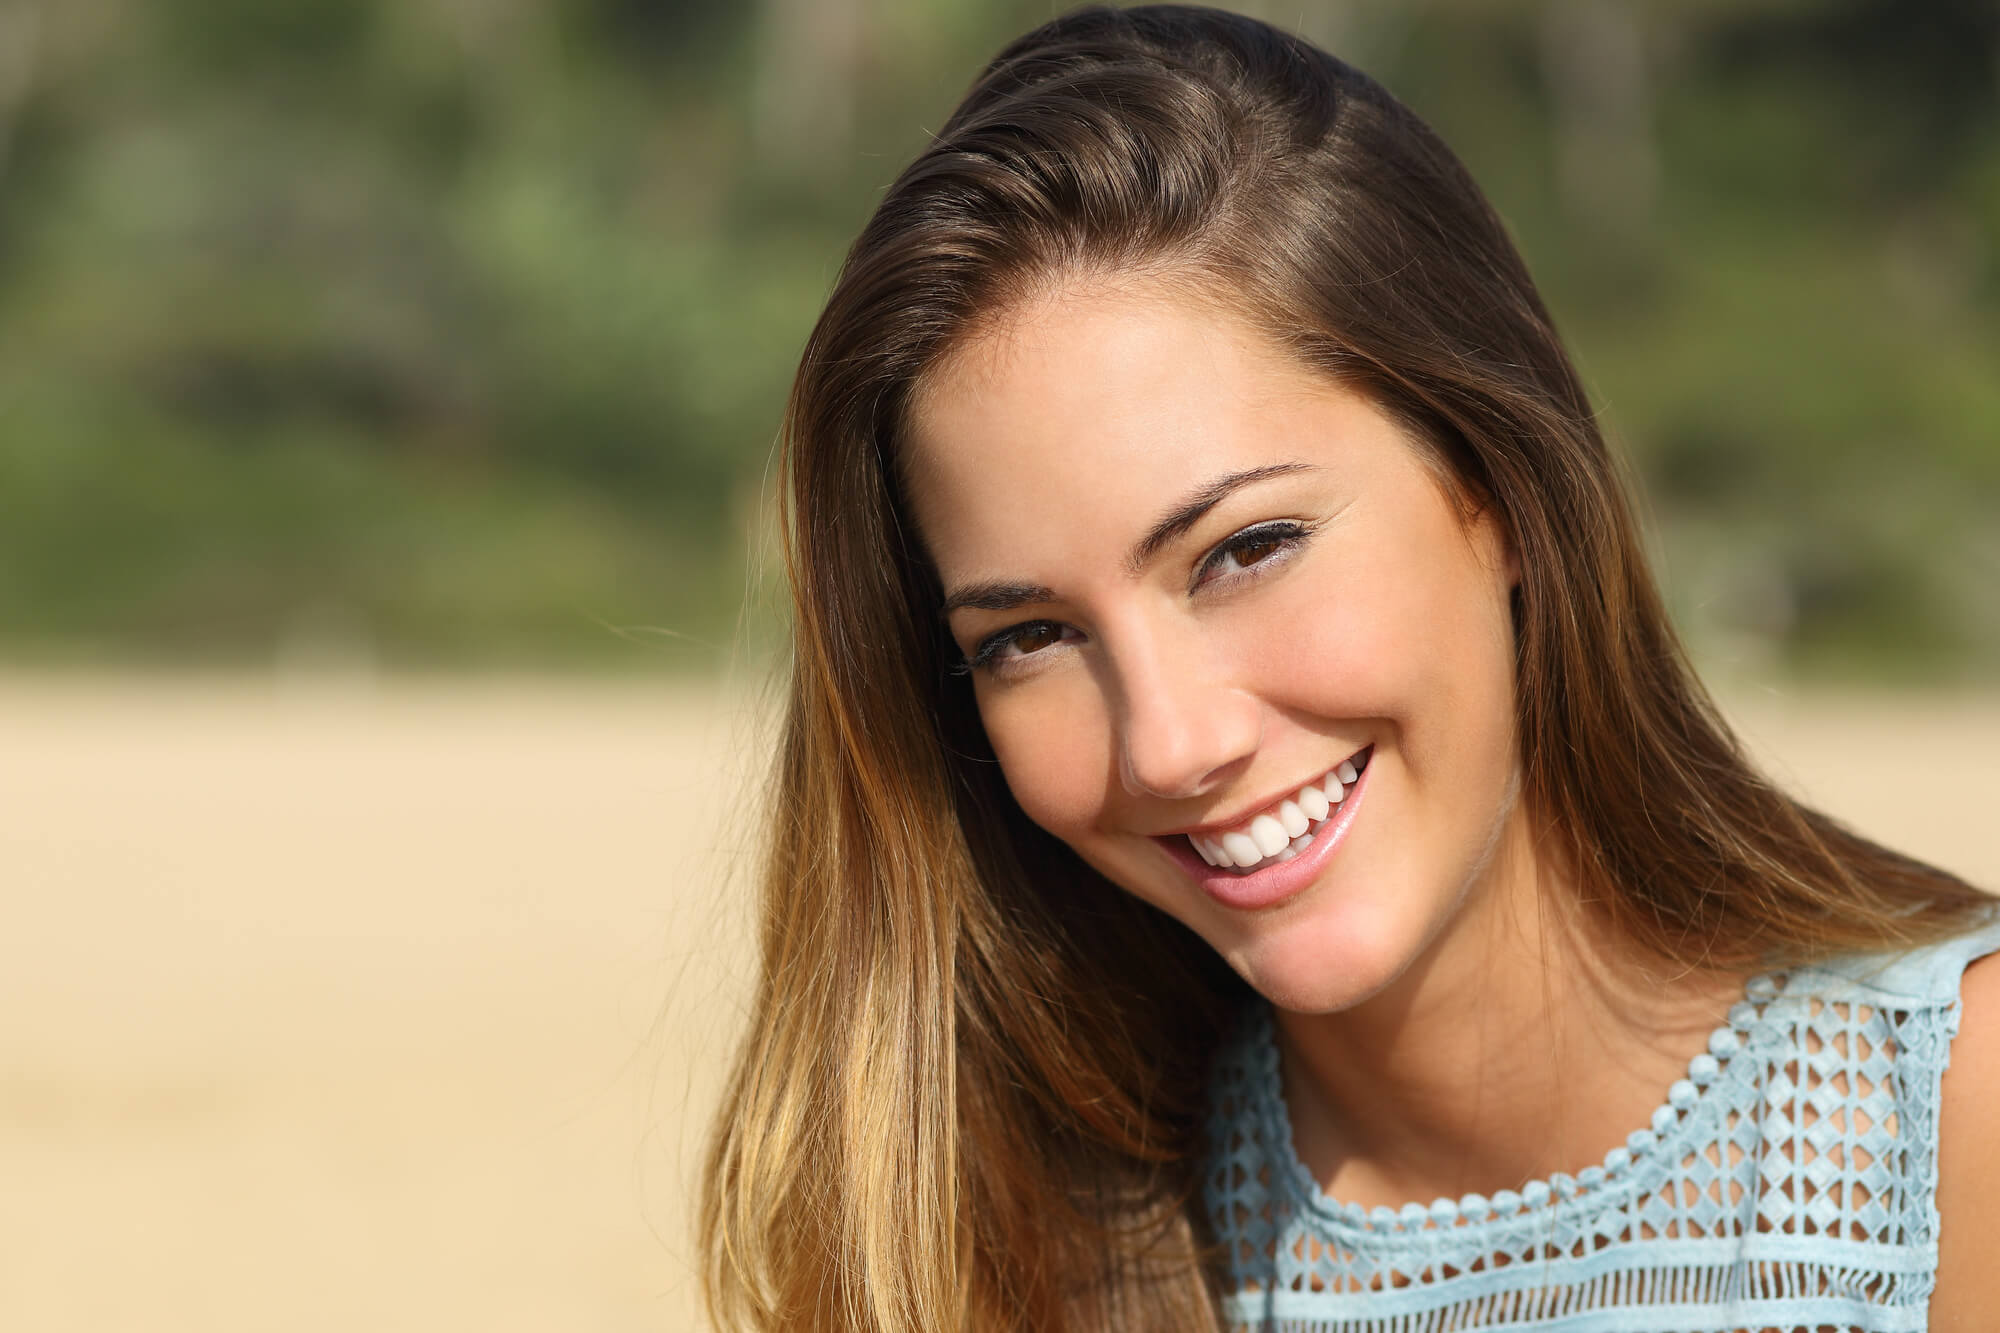 cosmetic dentistry services for more beautiful teeth and attractiveness